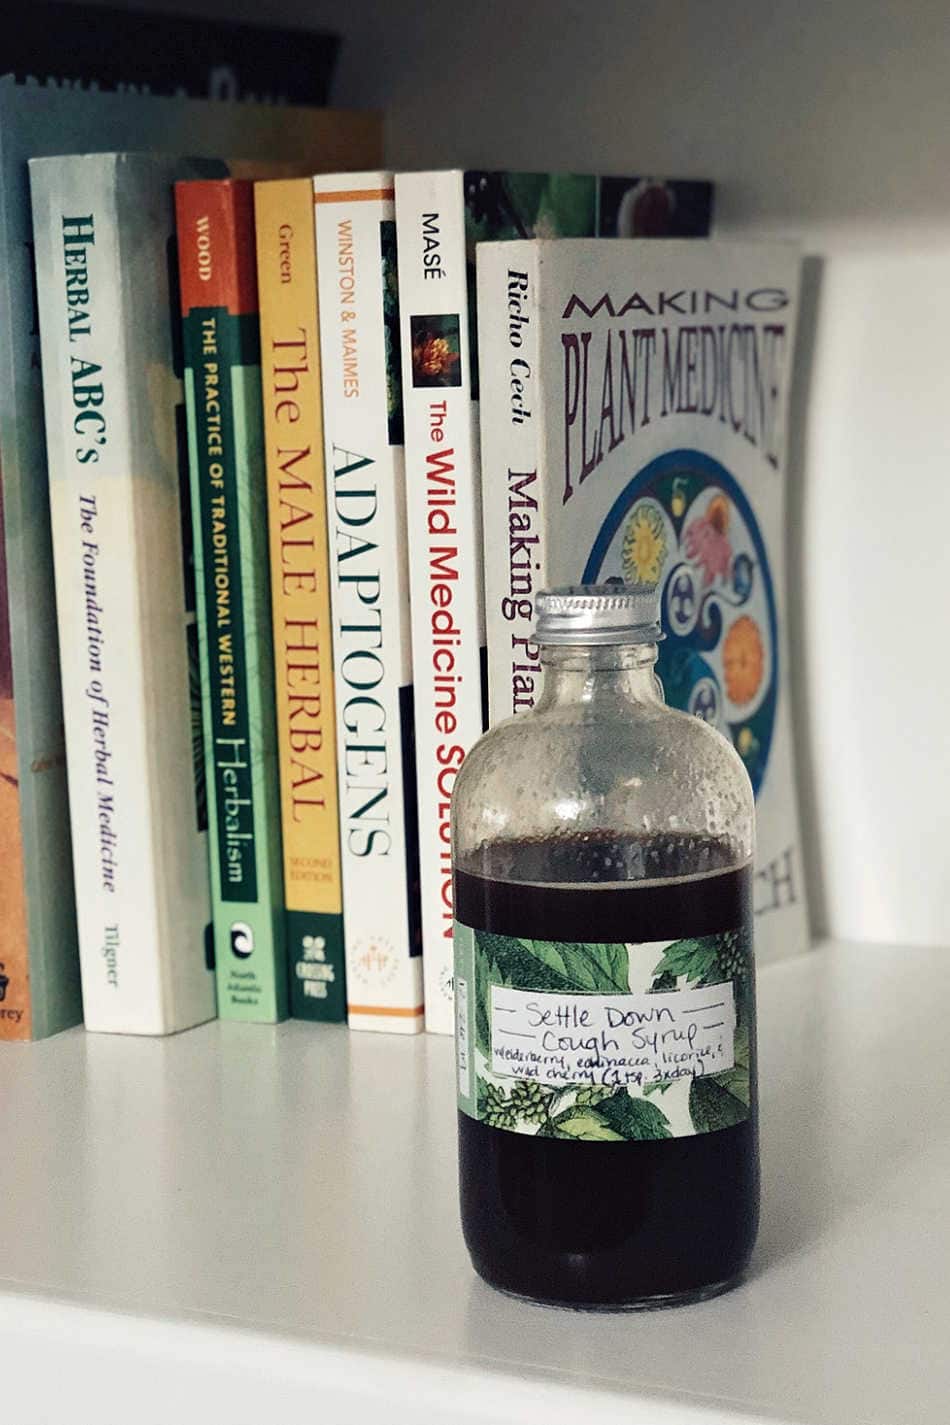 herbal syrup on shelf next to herb books